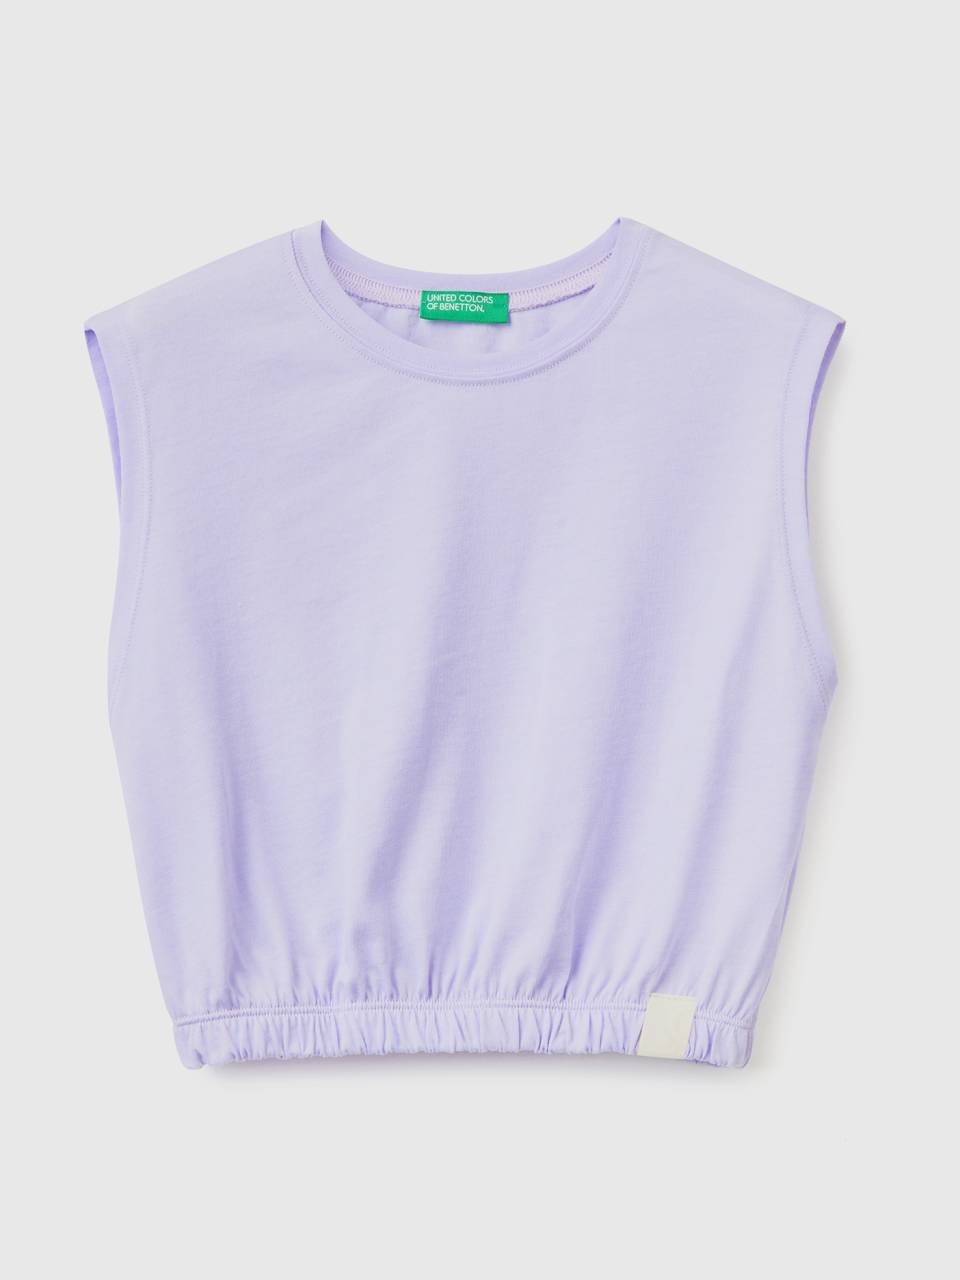 Benetton short tank top in recycled fabric. 1